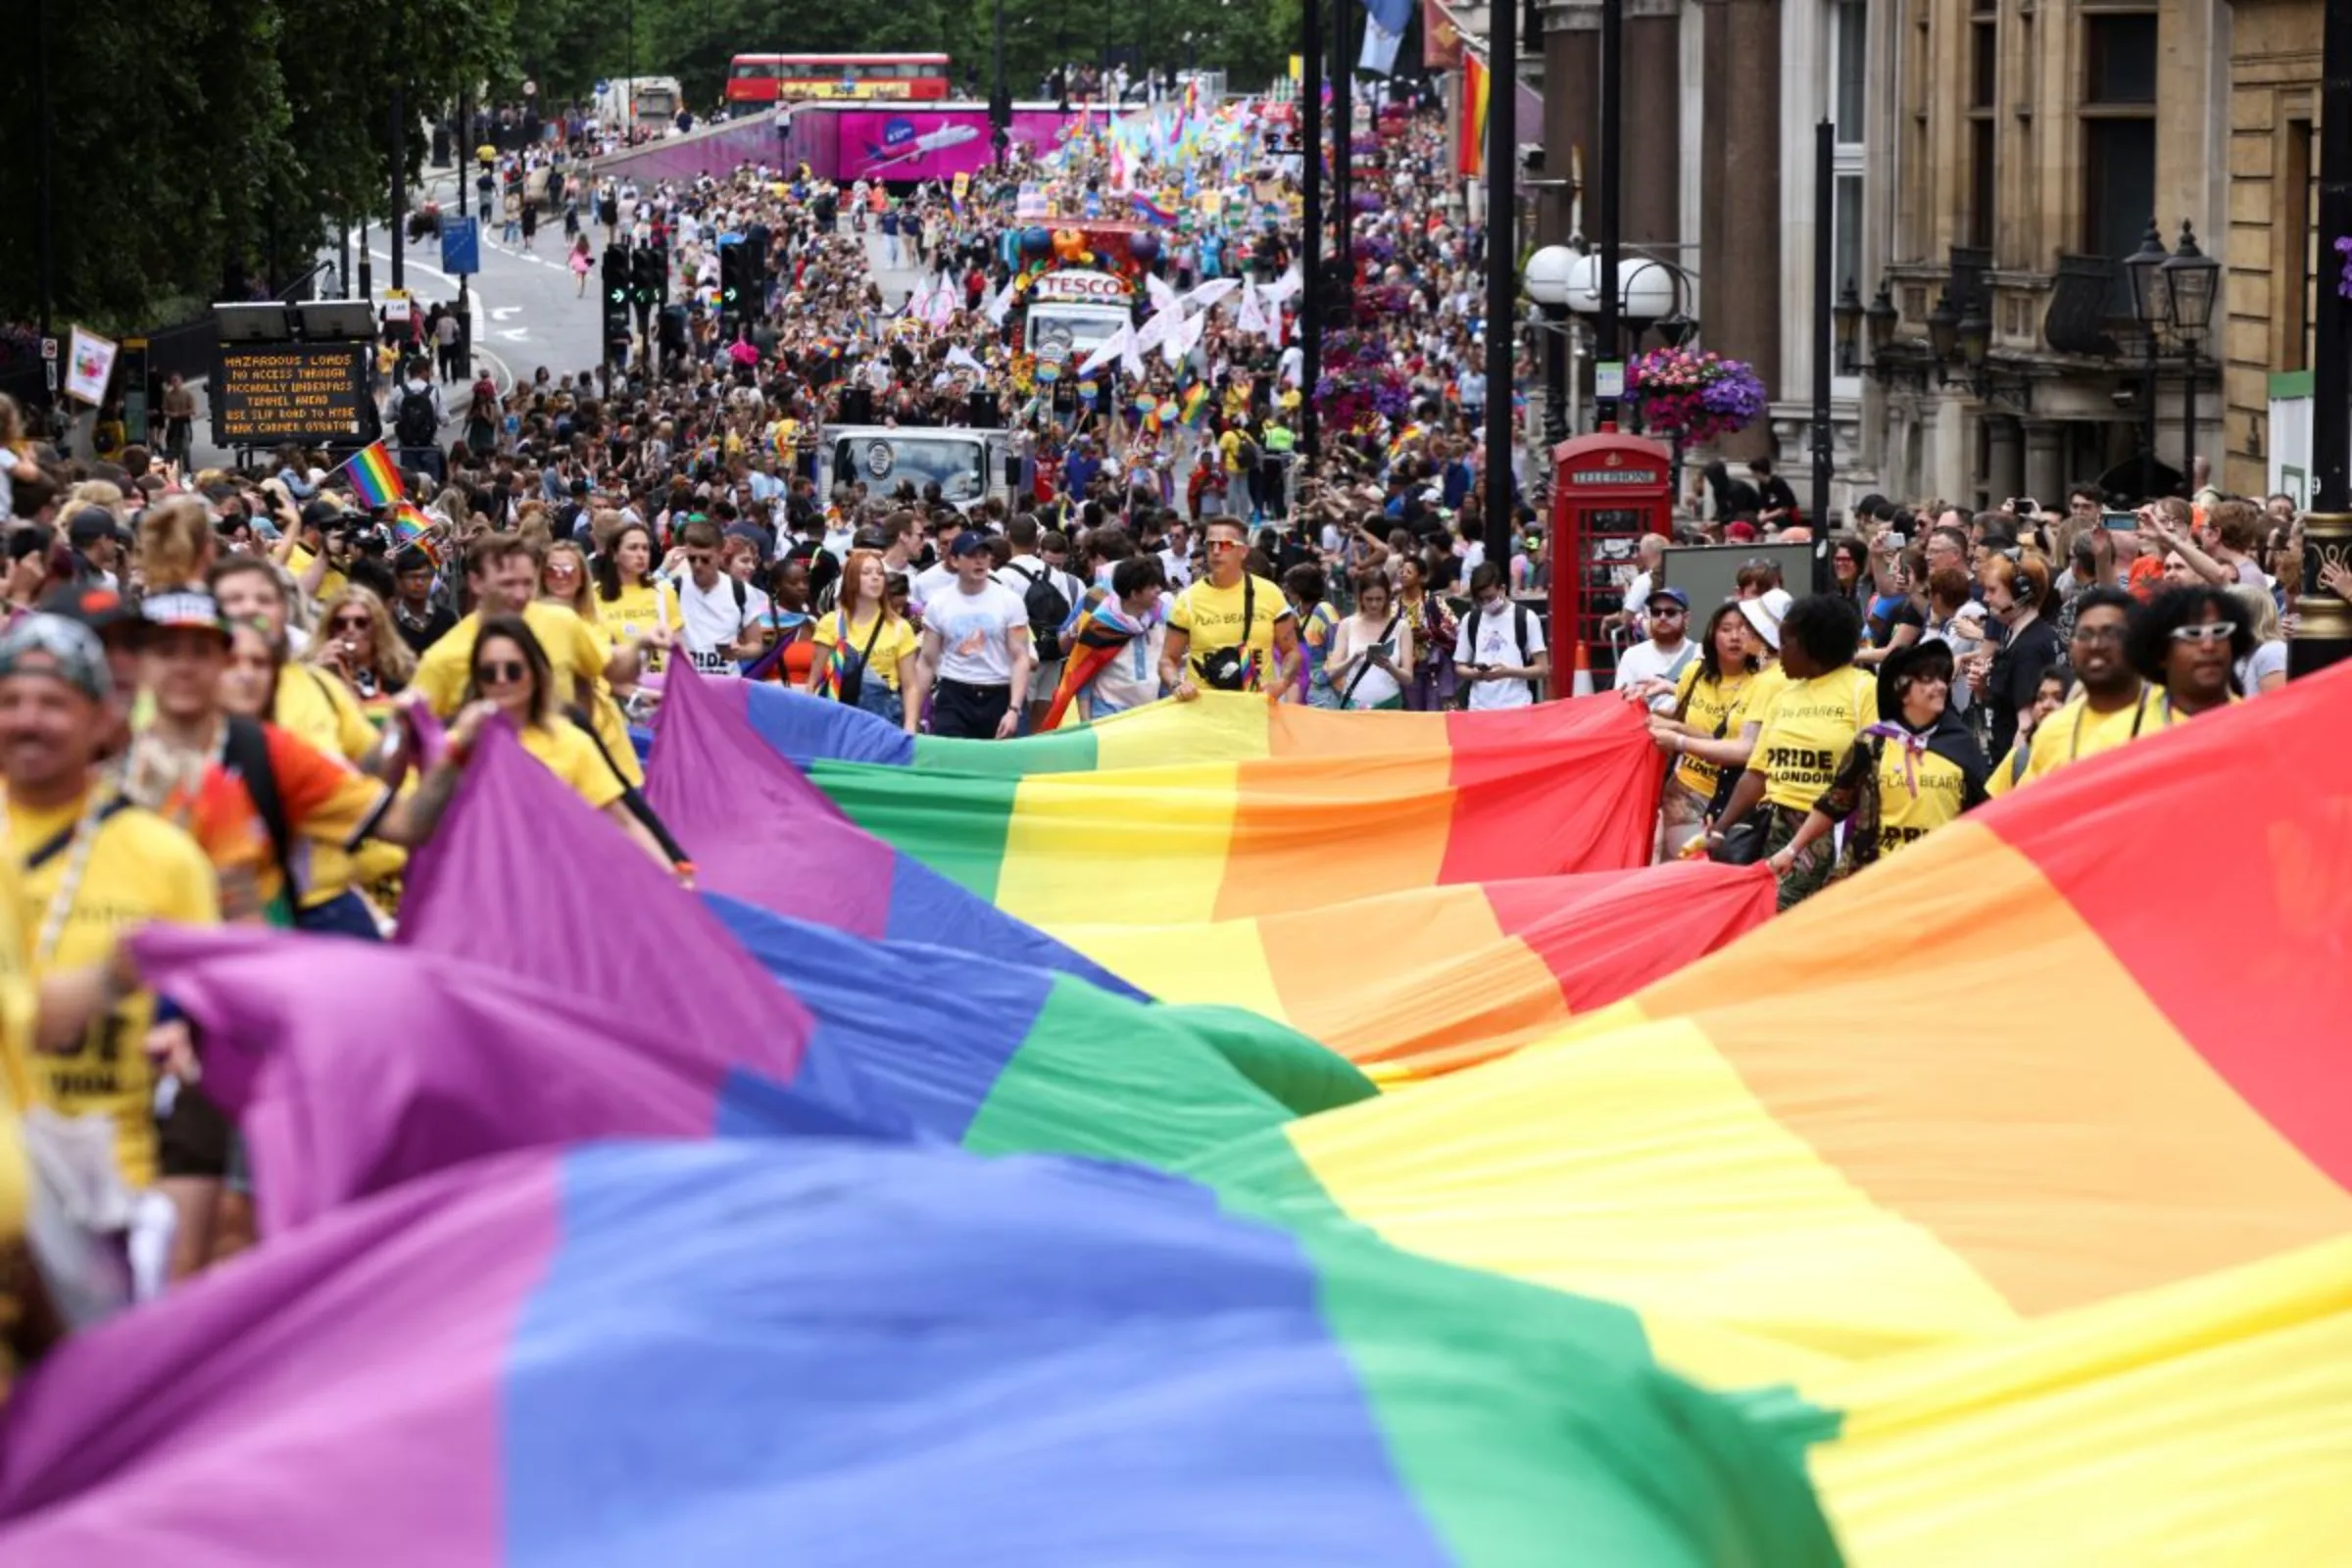 People carry a large rainbow flag, as they take part in the 2022 Pride Parade in London, Britain July 2, 2022. REUTERS/Henry Nicholls